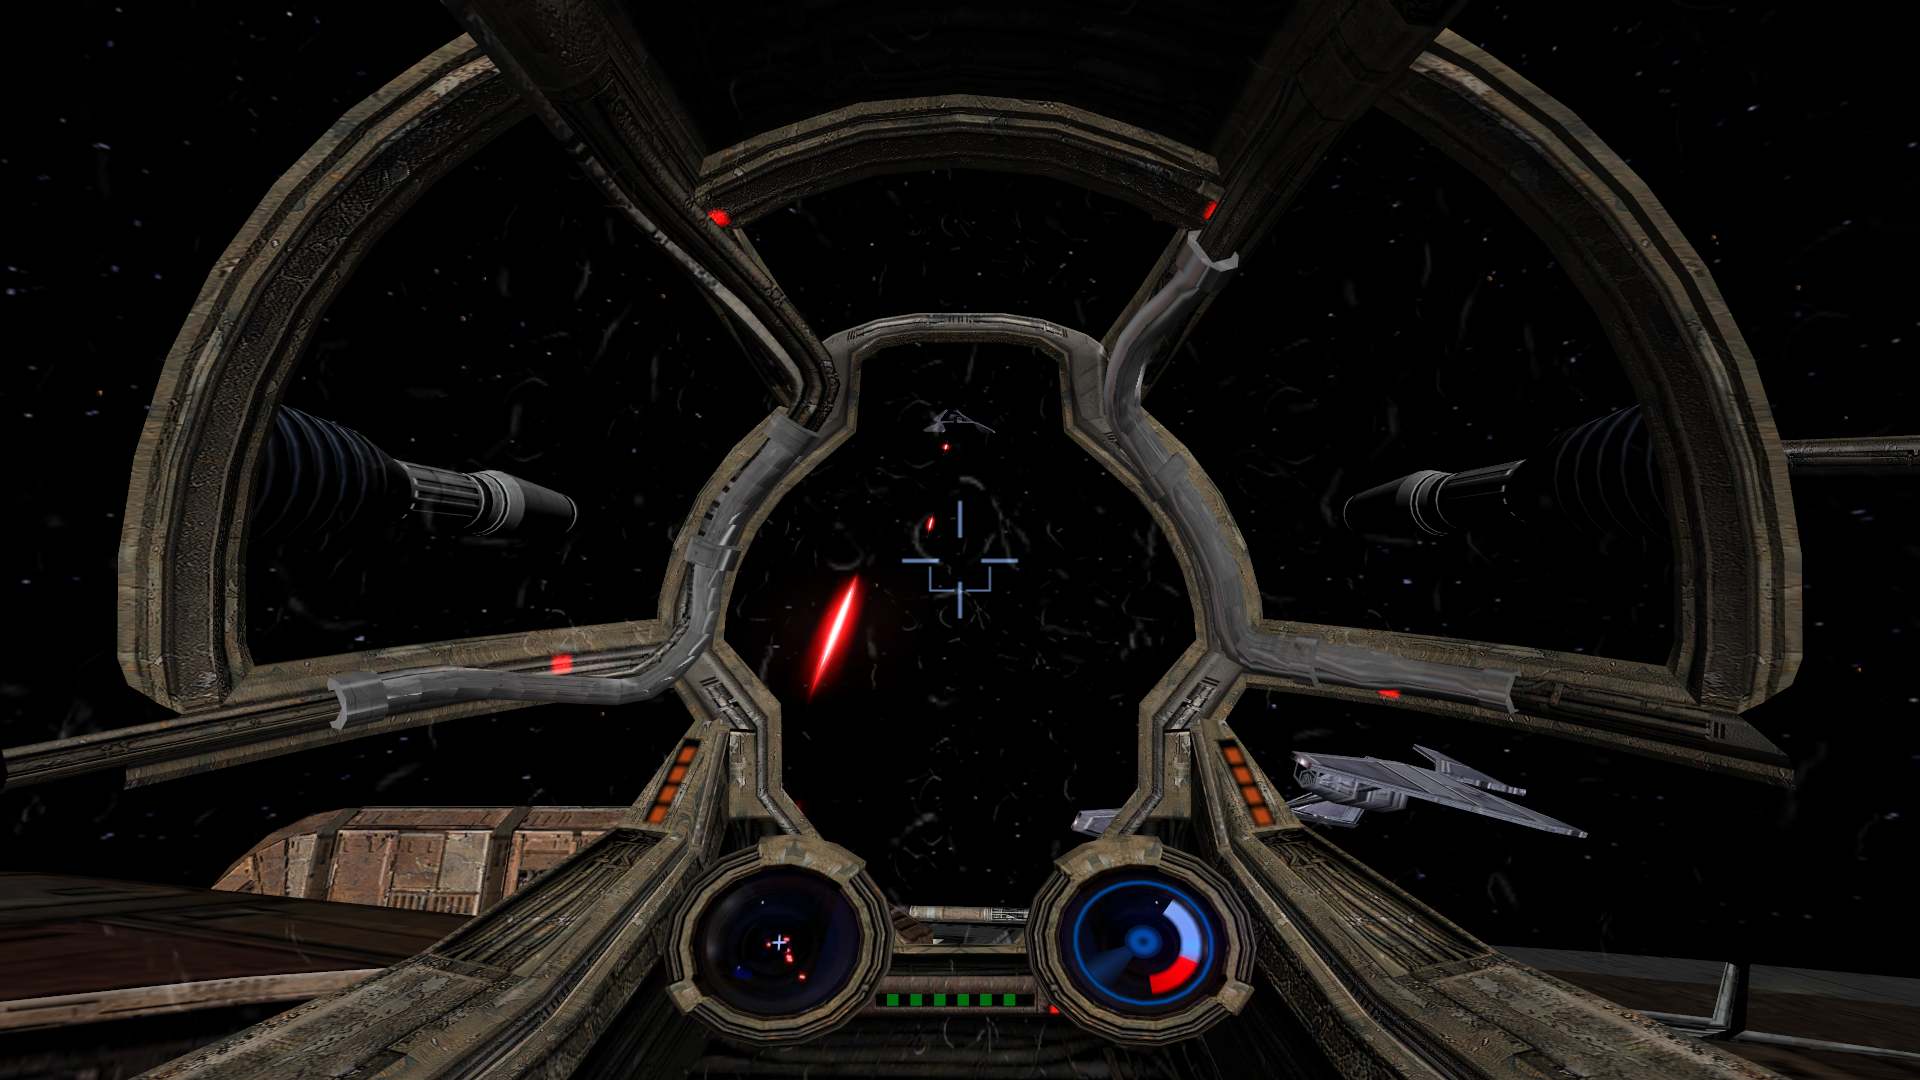 Starblast - PCGamingWiki PCGW - bugs, fixes, crashes, mods, guides and  improvements for every PC game